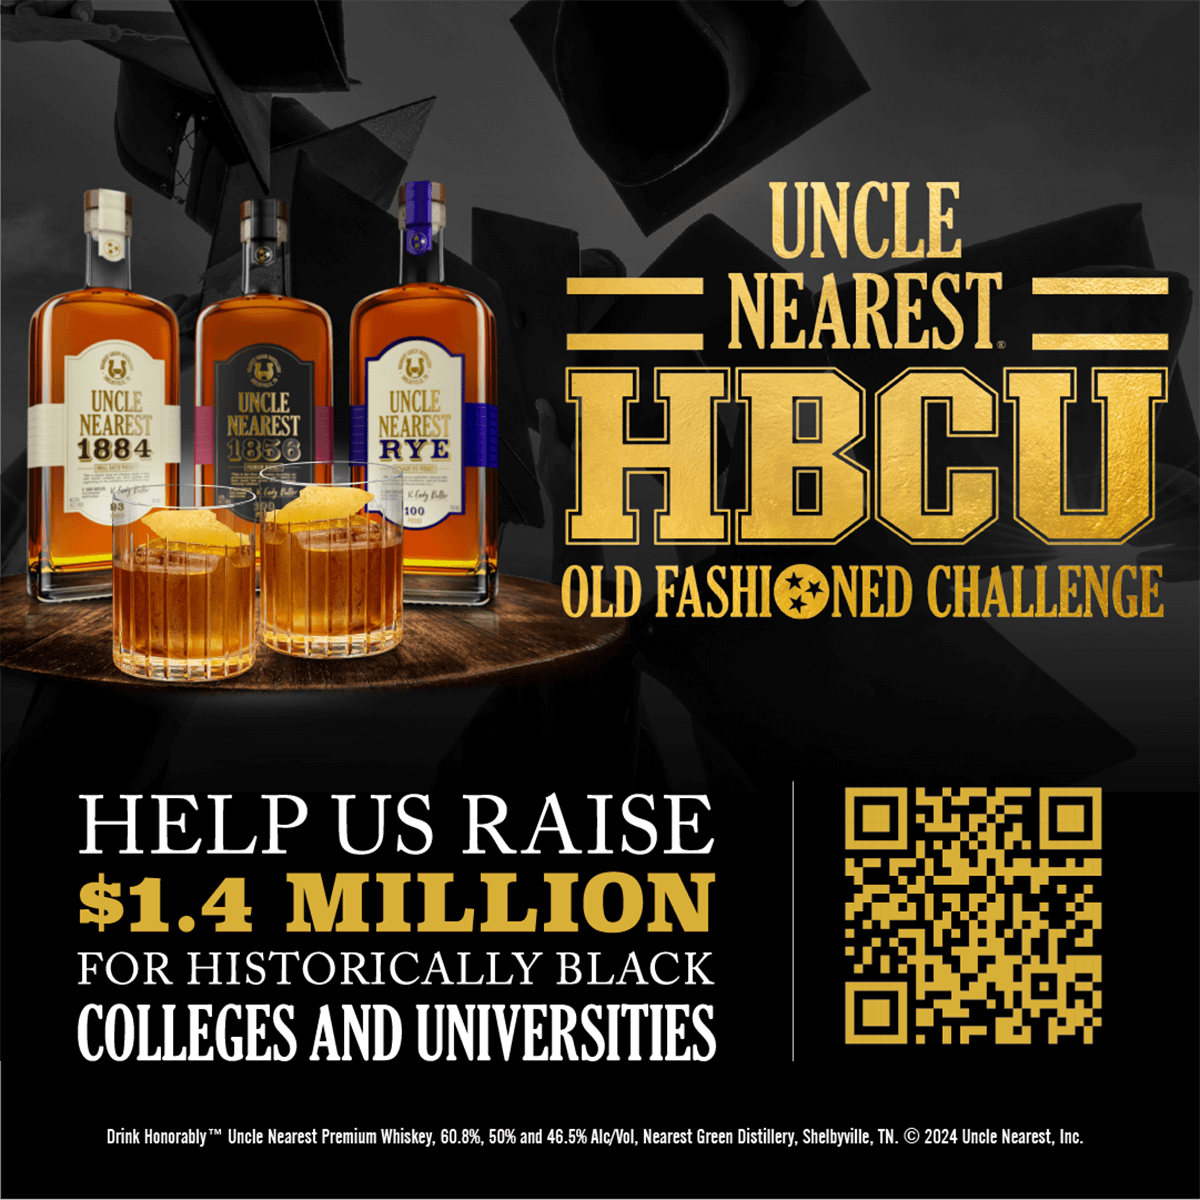 UNCLE NEAREST HBCU OLD FASHIoNED CHALLENGE HELP US RAISE $1.4 MILLION FOR HISTORICALLY BLACK COLLEGES AND UNIVERSITIES